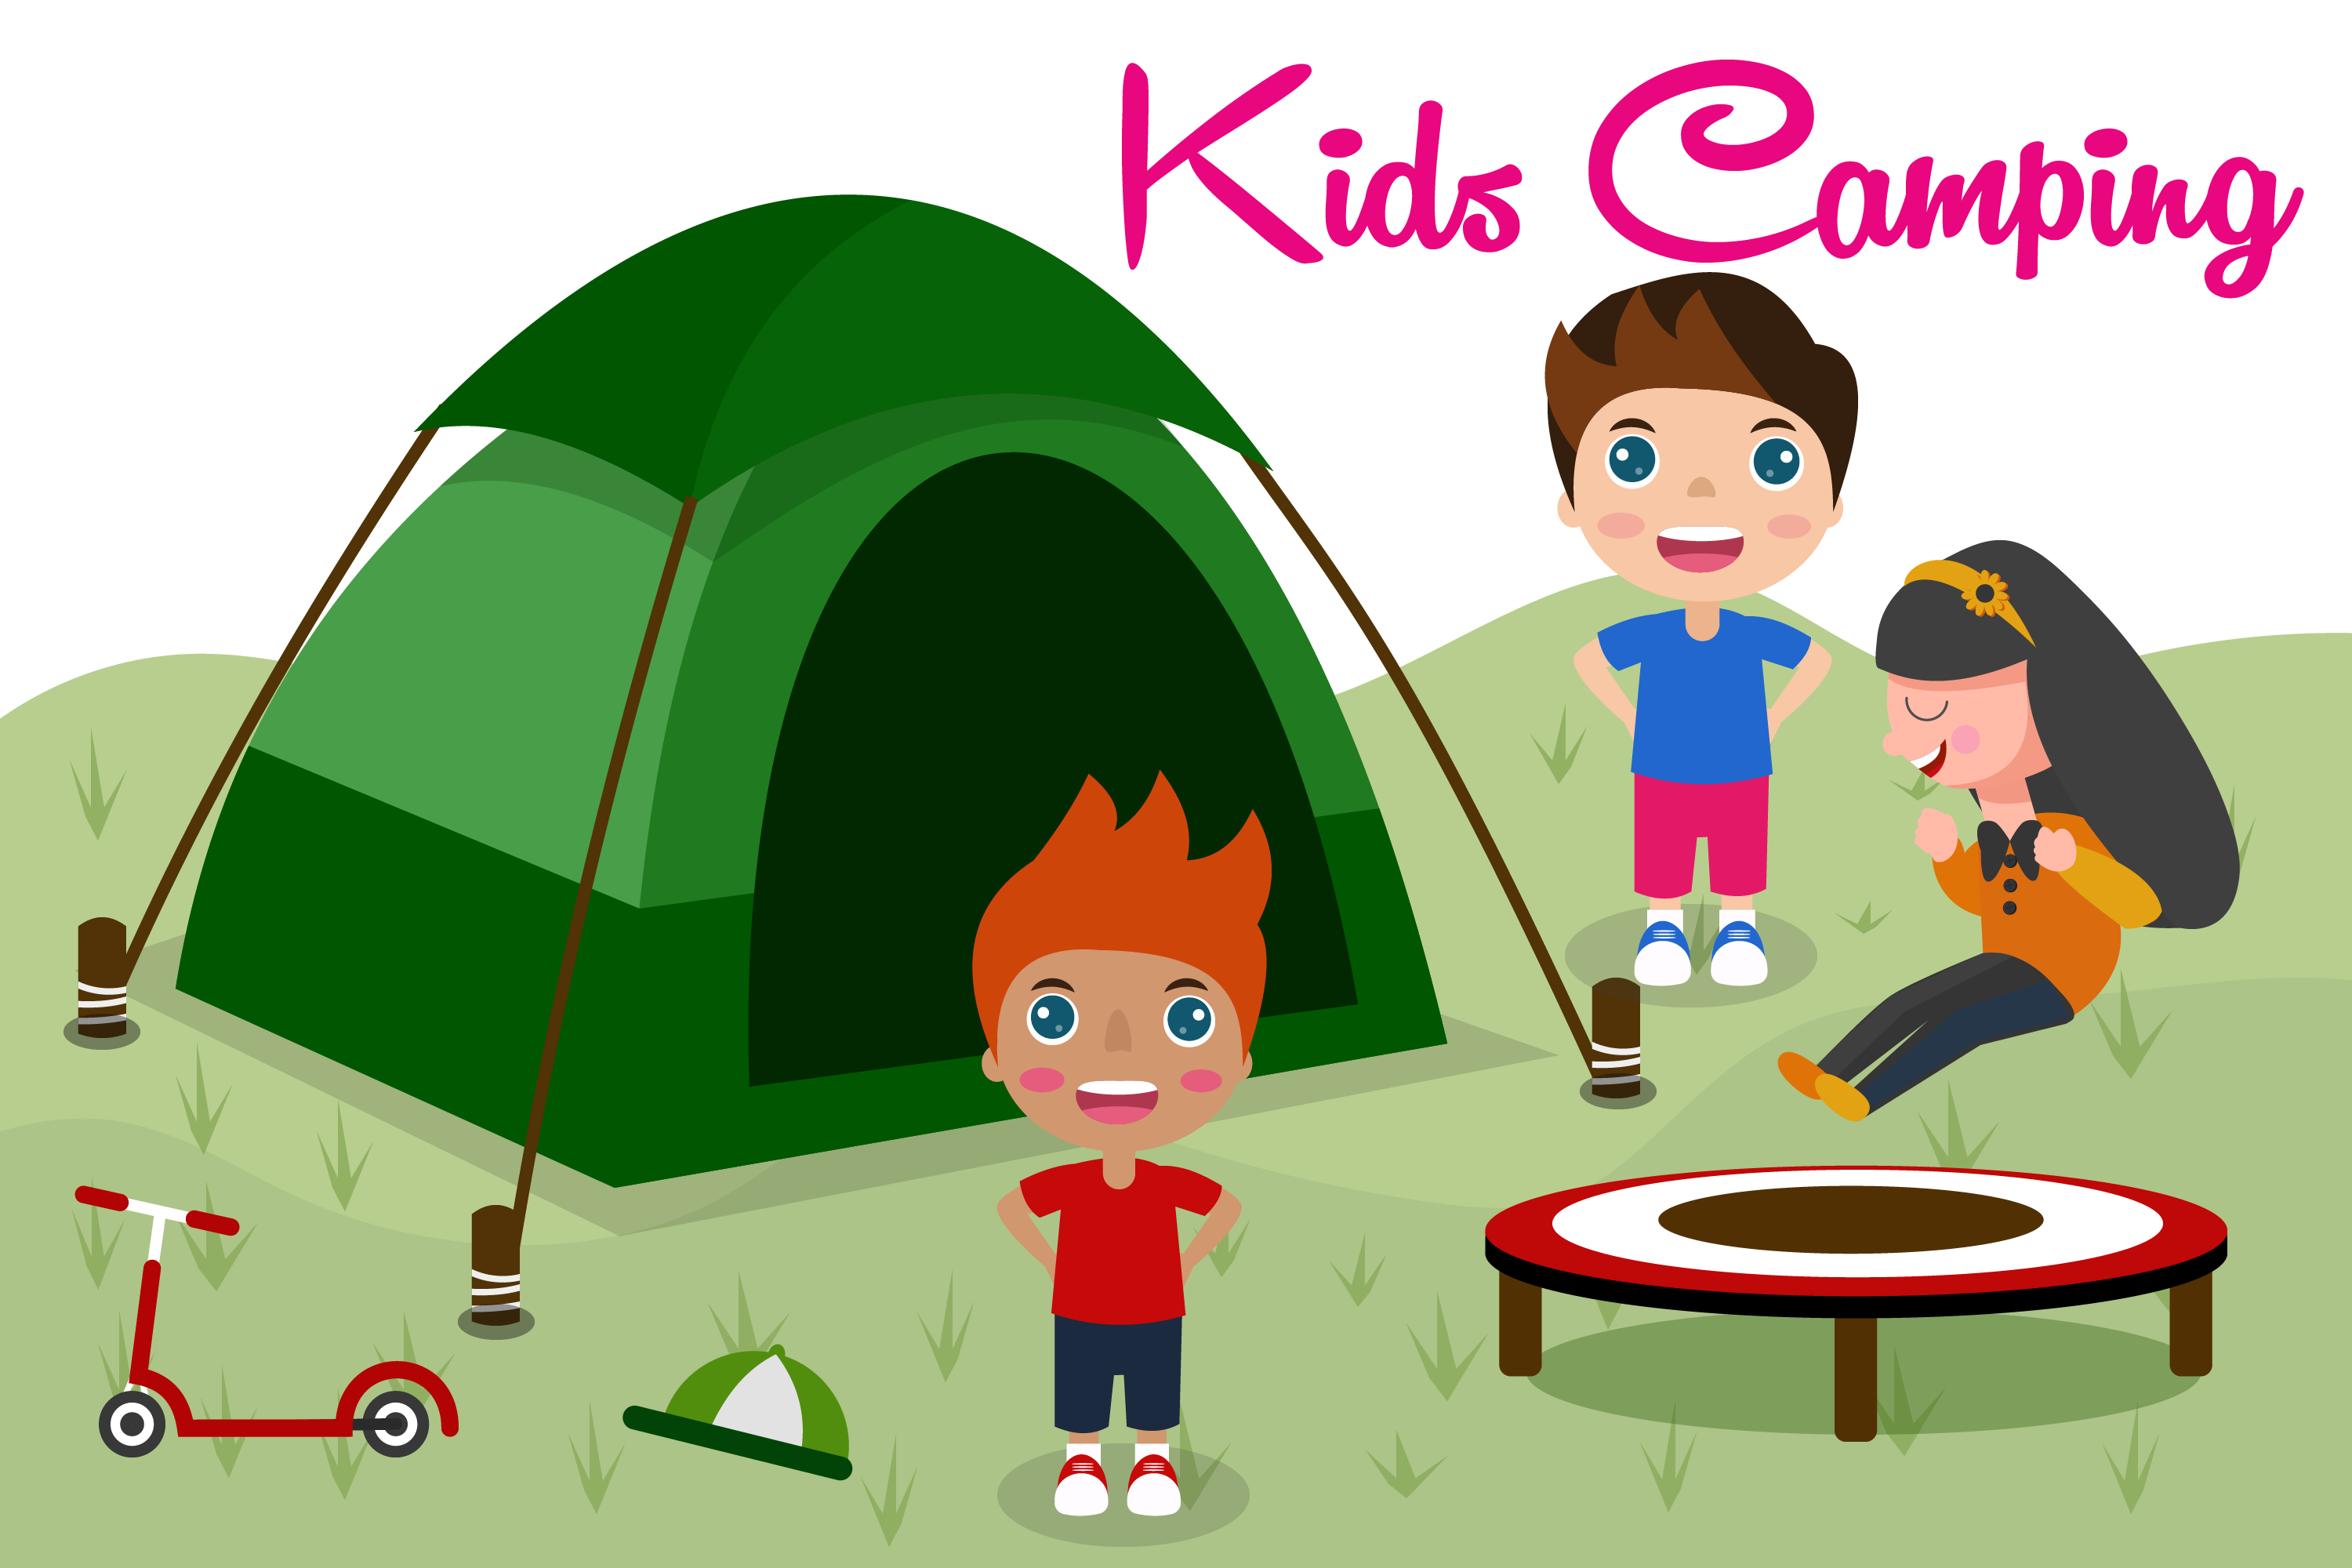 Camping for kids. Camping illustration.